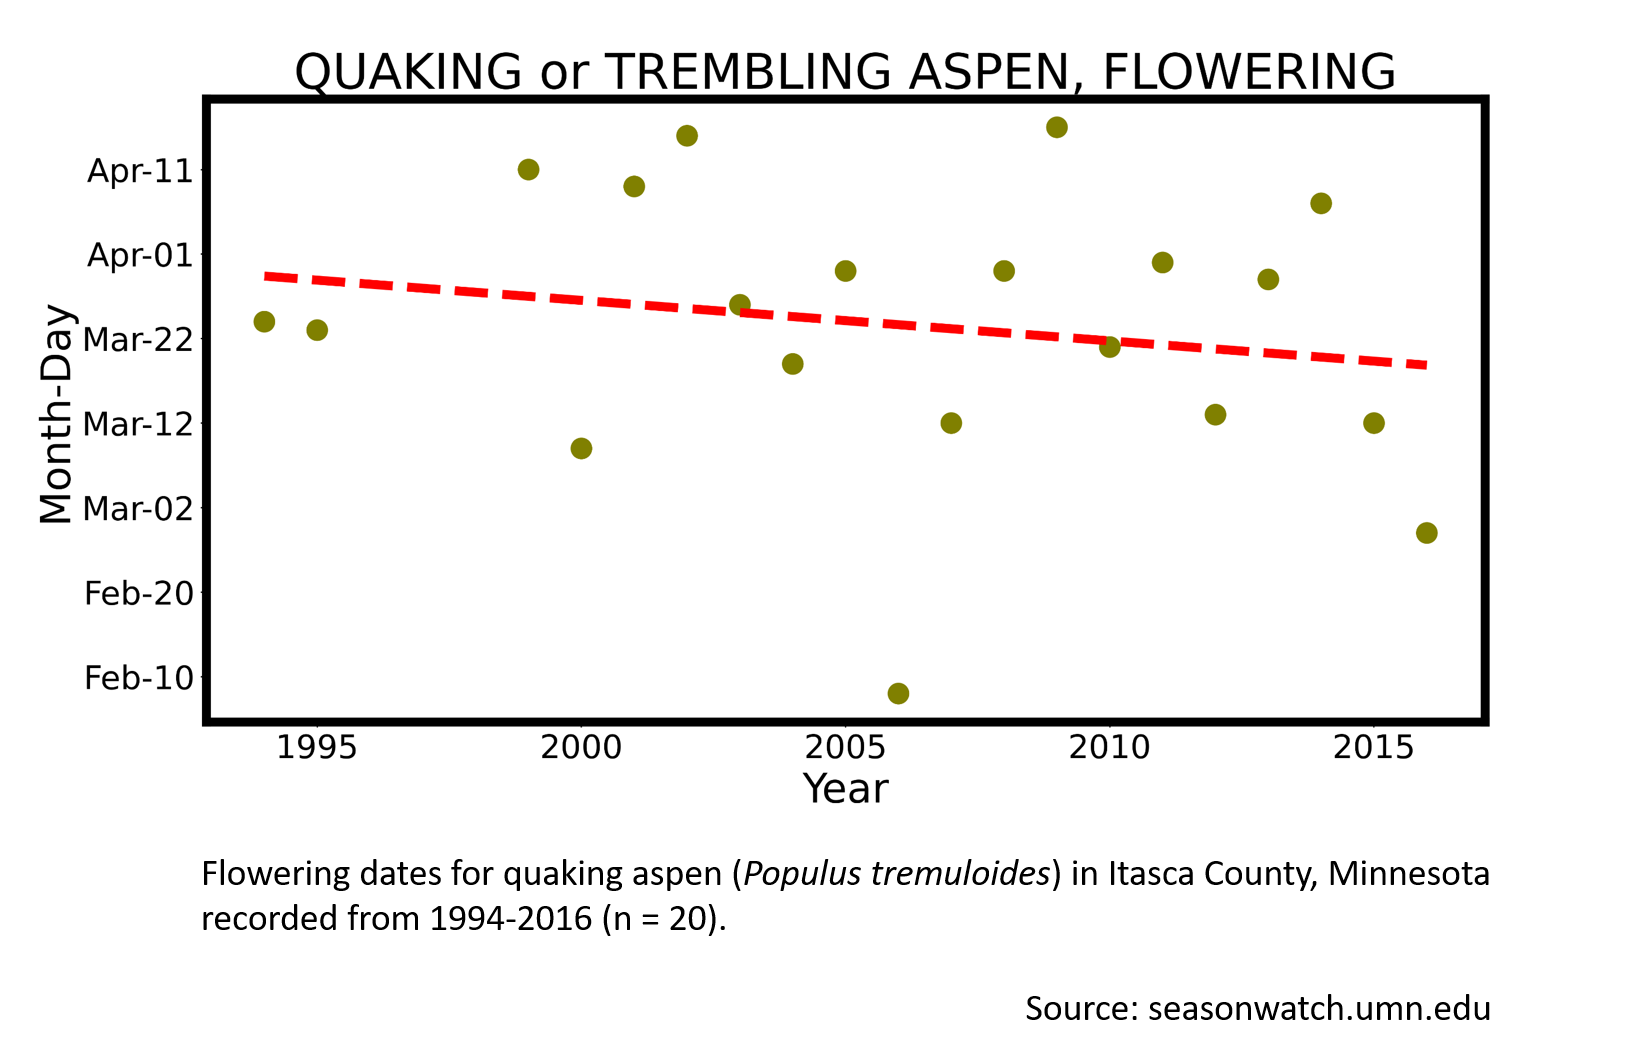 Scatterplot showing quaking aspen phenology observations in Itasca County, Minnesota